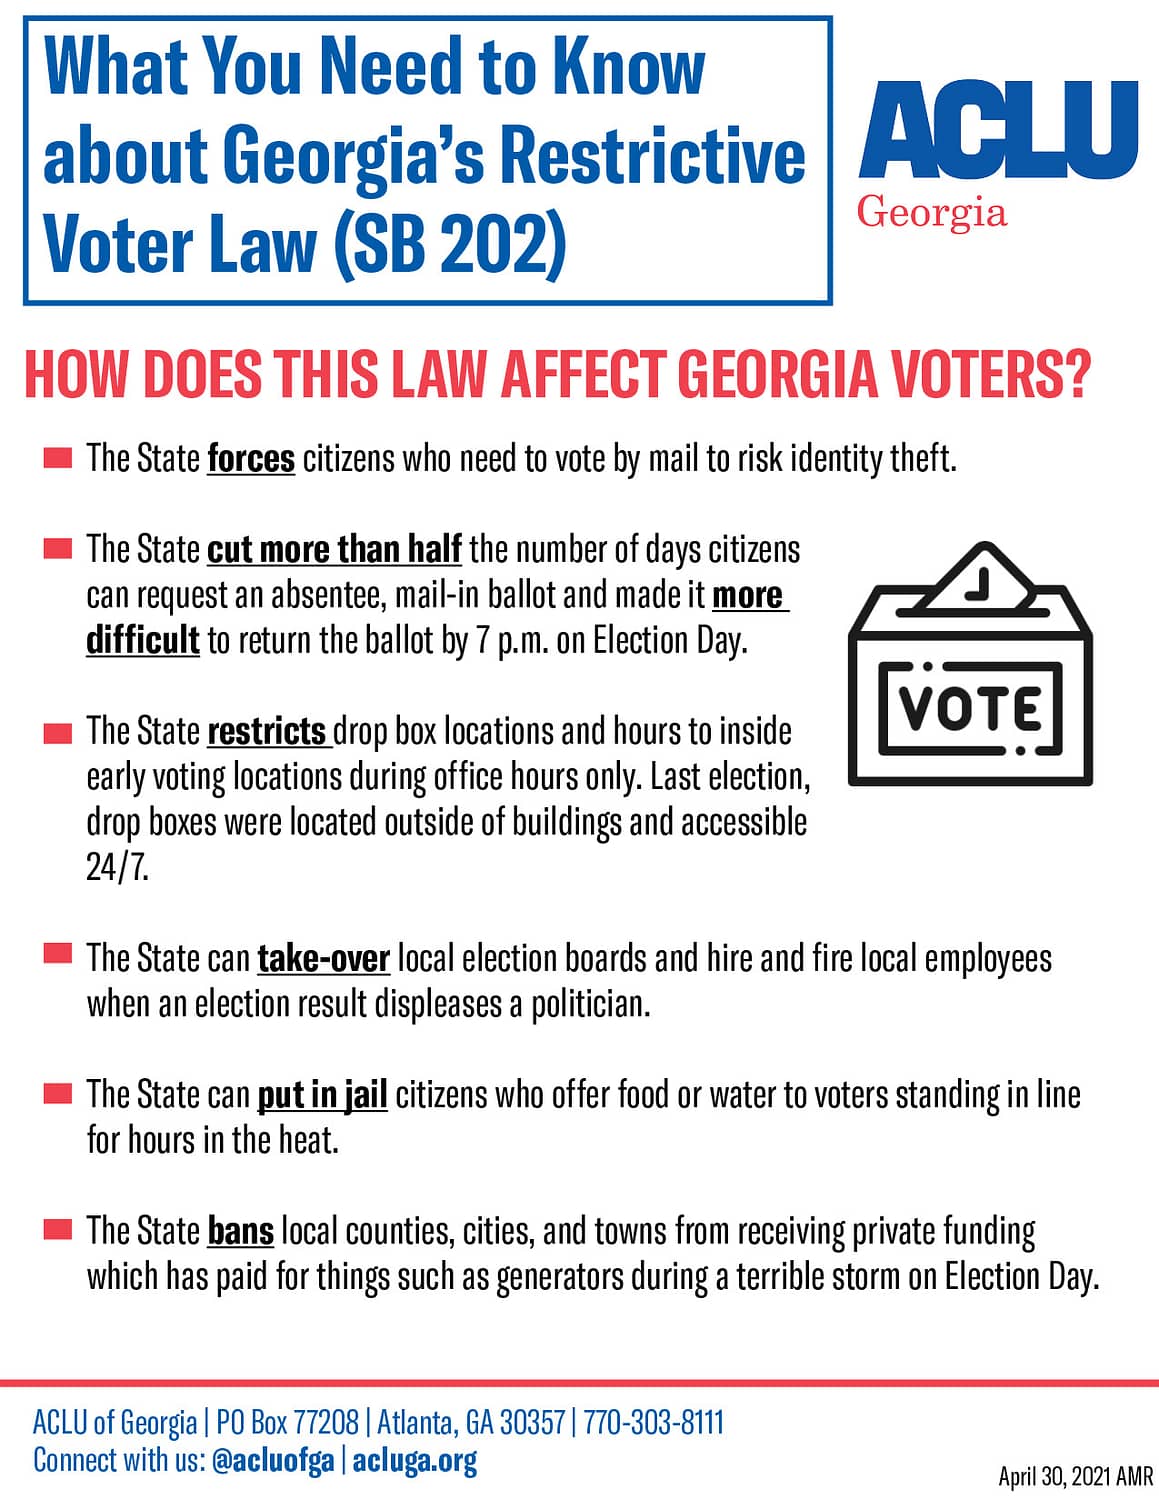 What you need to Know about Georgia's Restrictive Voter Law